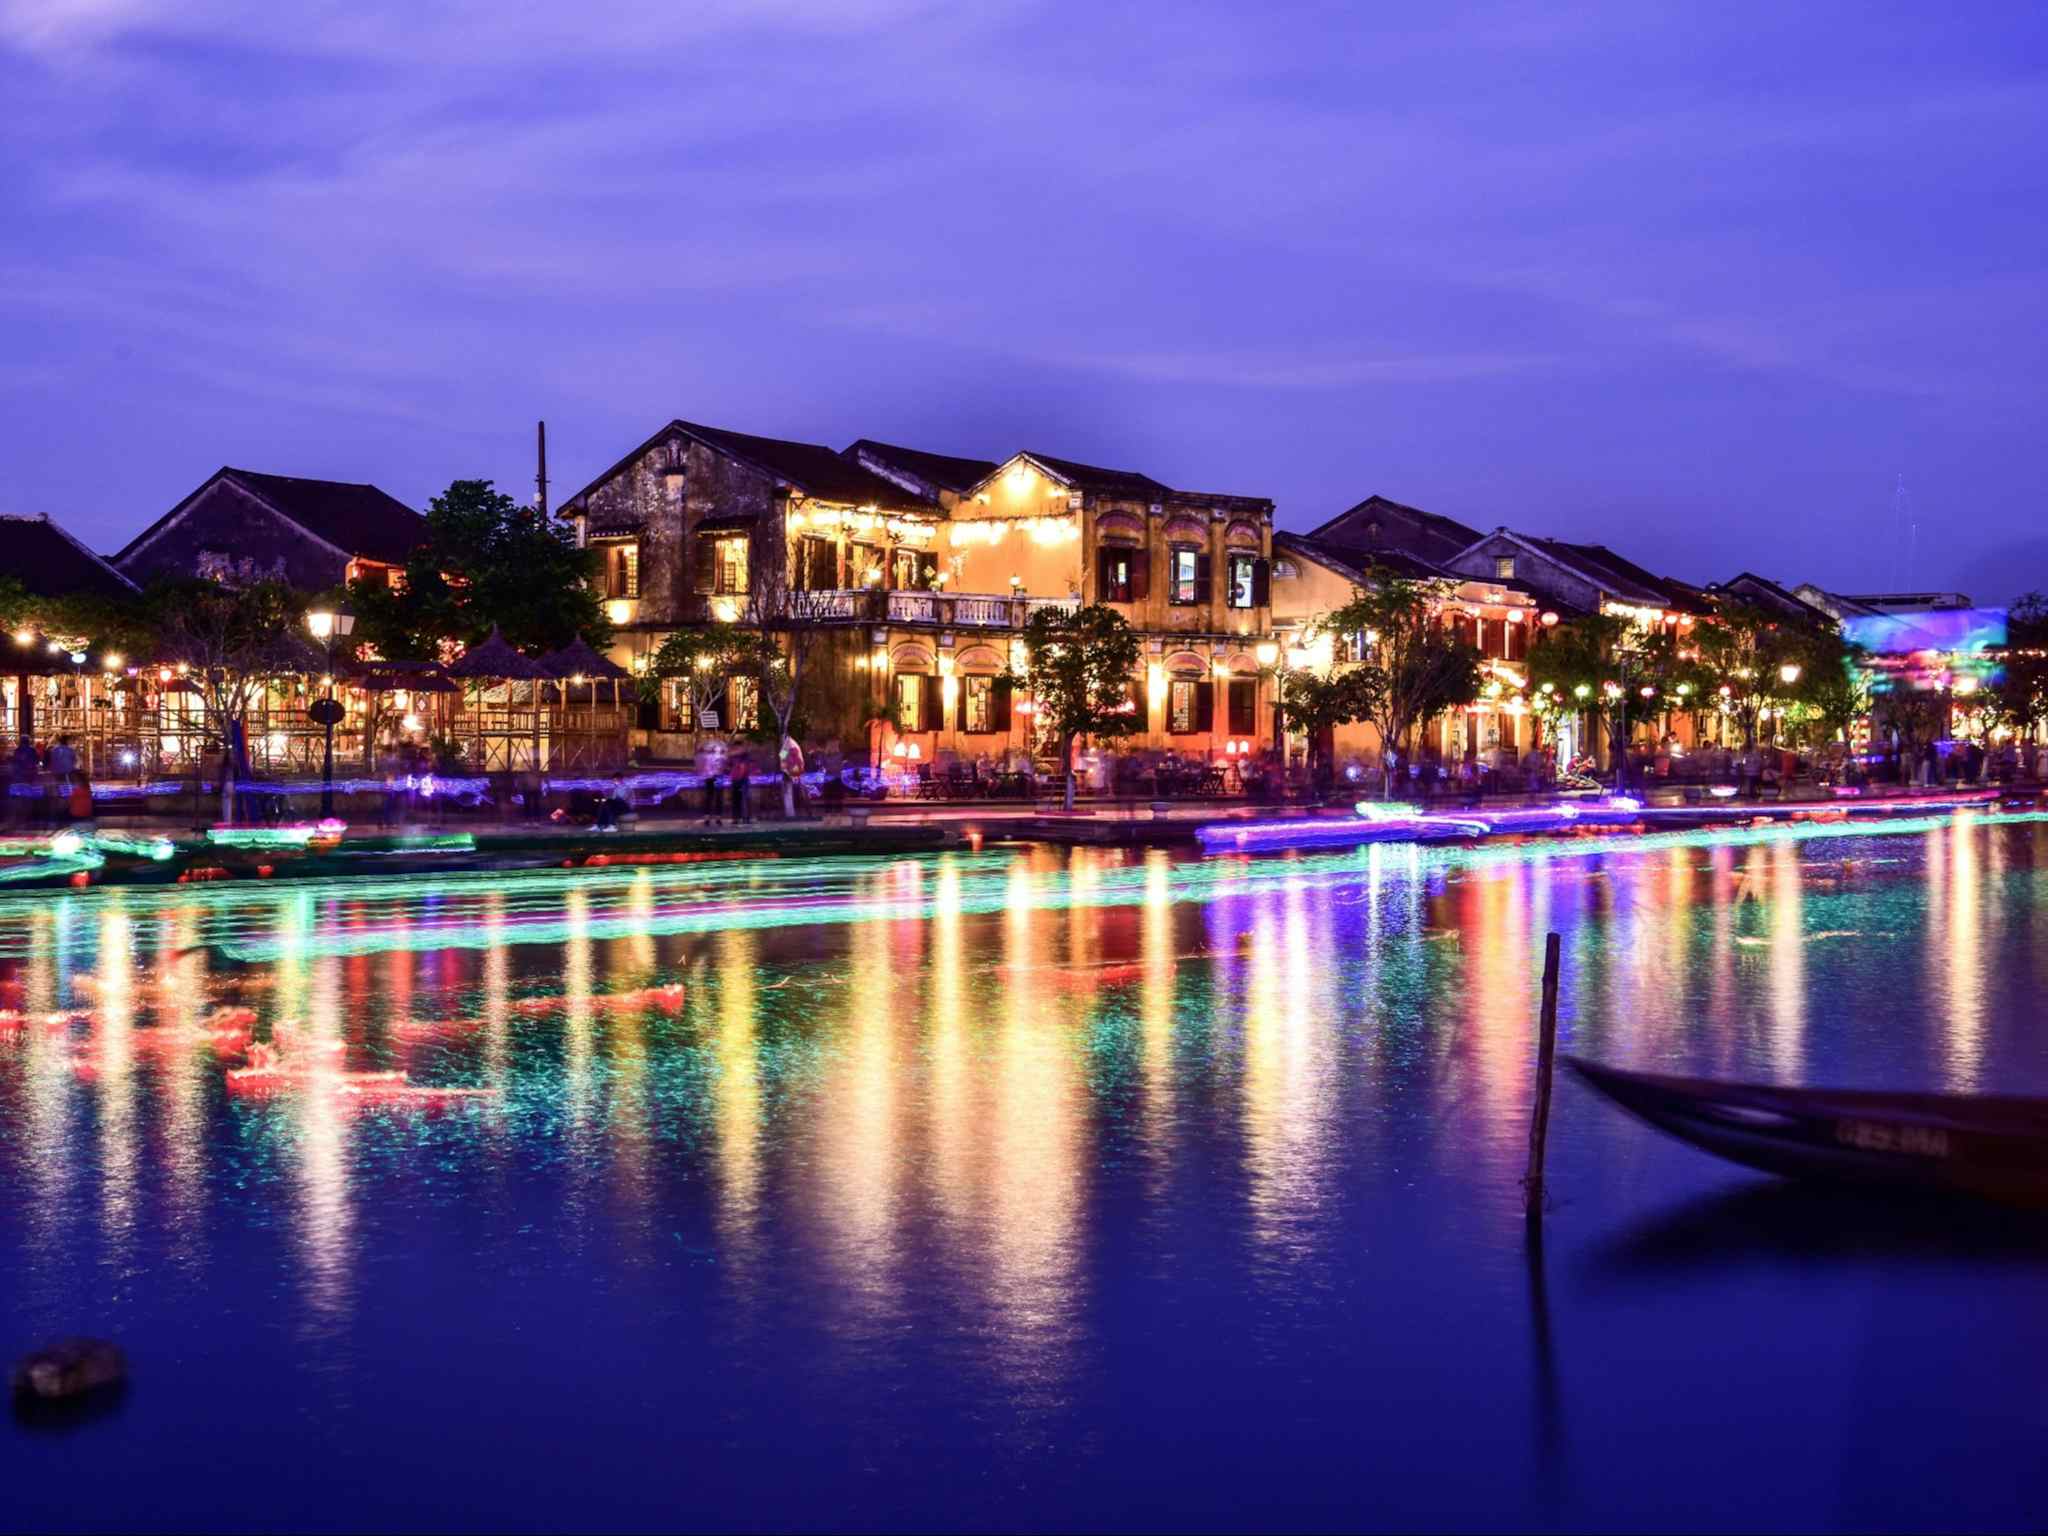 Hoi An by night, Vietnam. Photo: Host/Easia Active